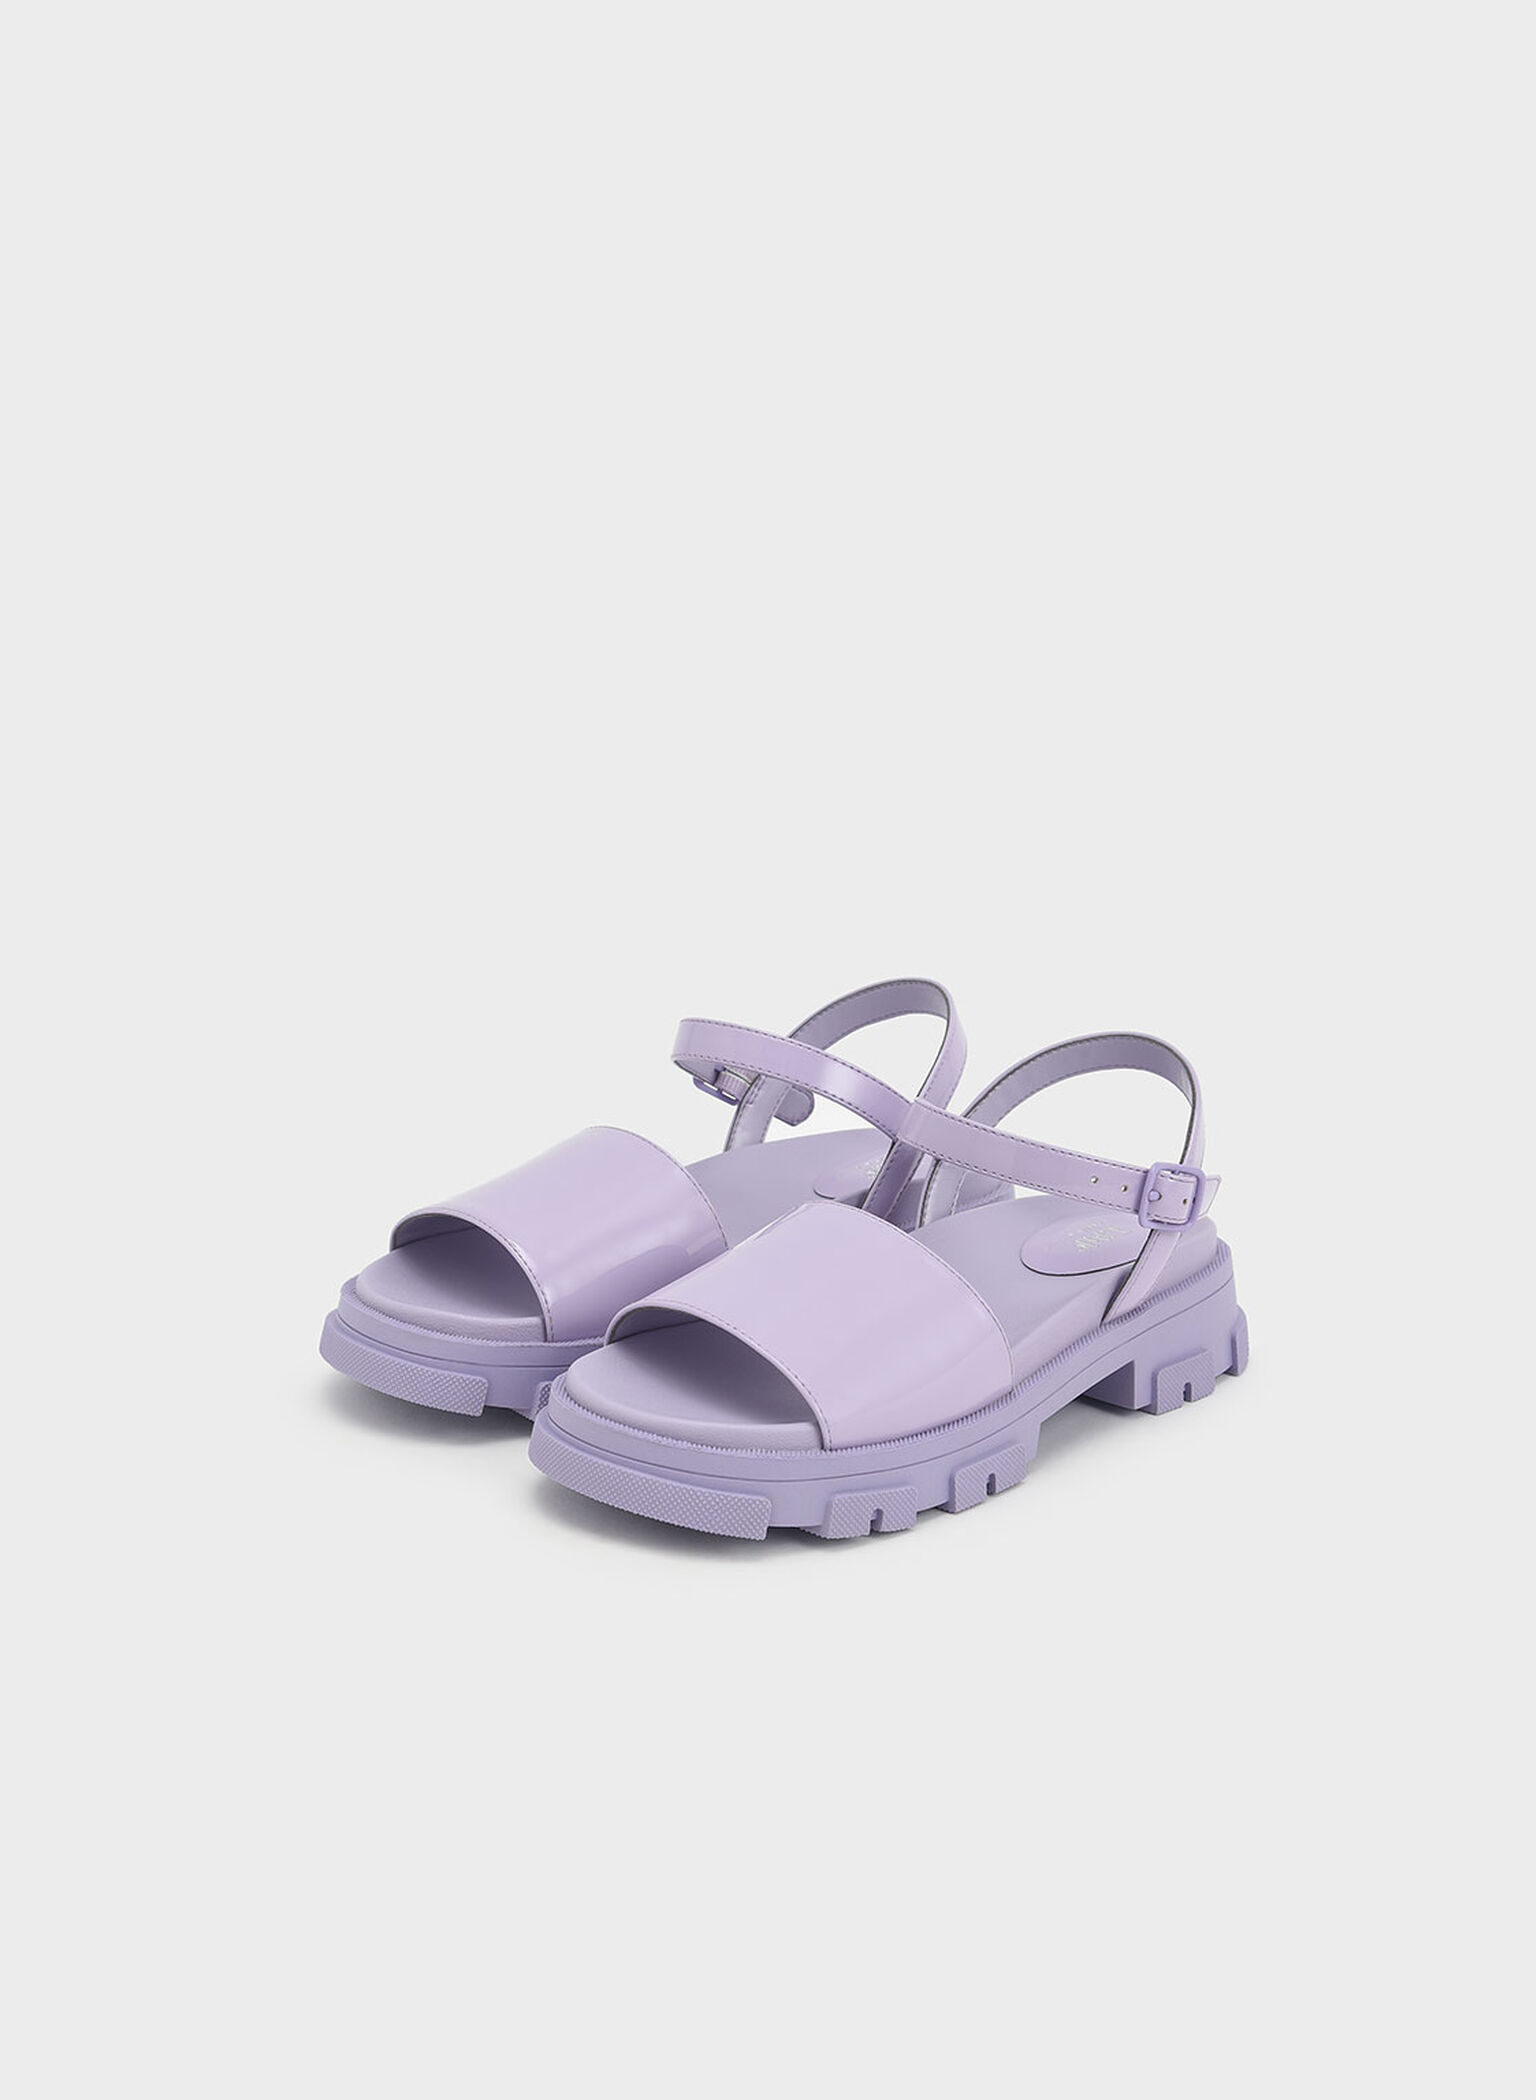 Girls' Patent Ankle-Strap Sandals, Lilac, hi-res